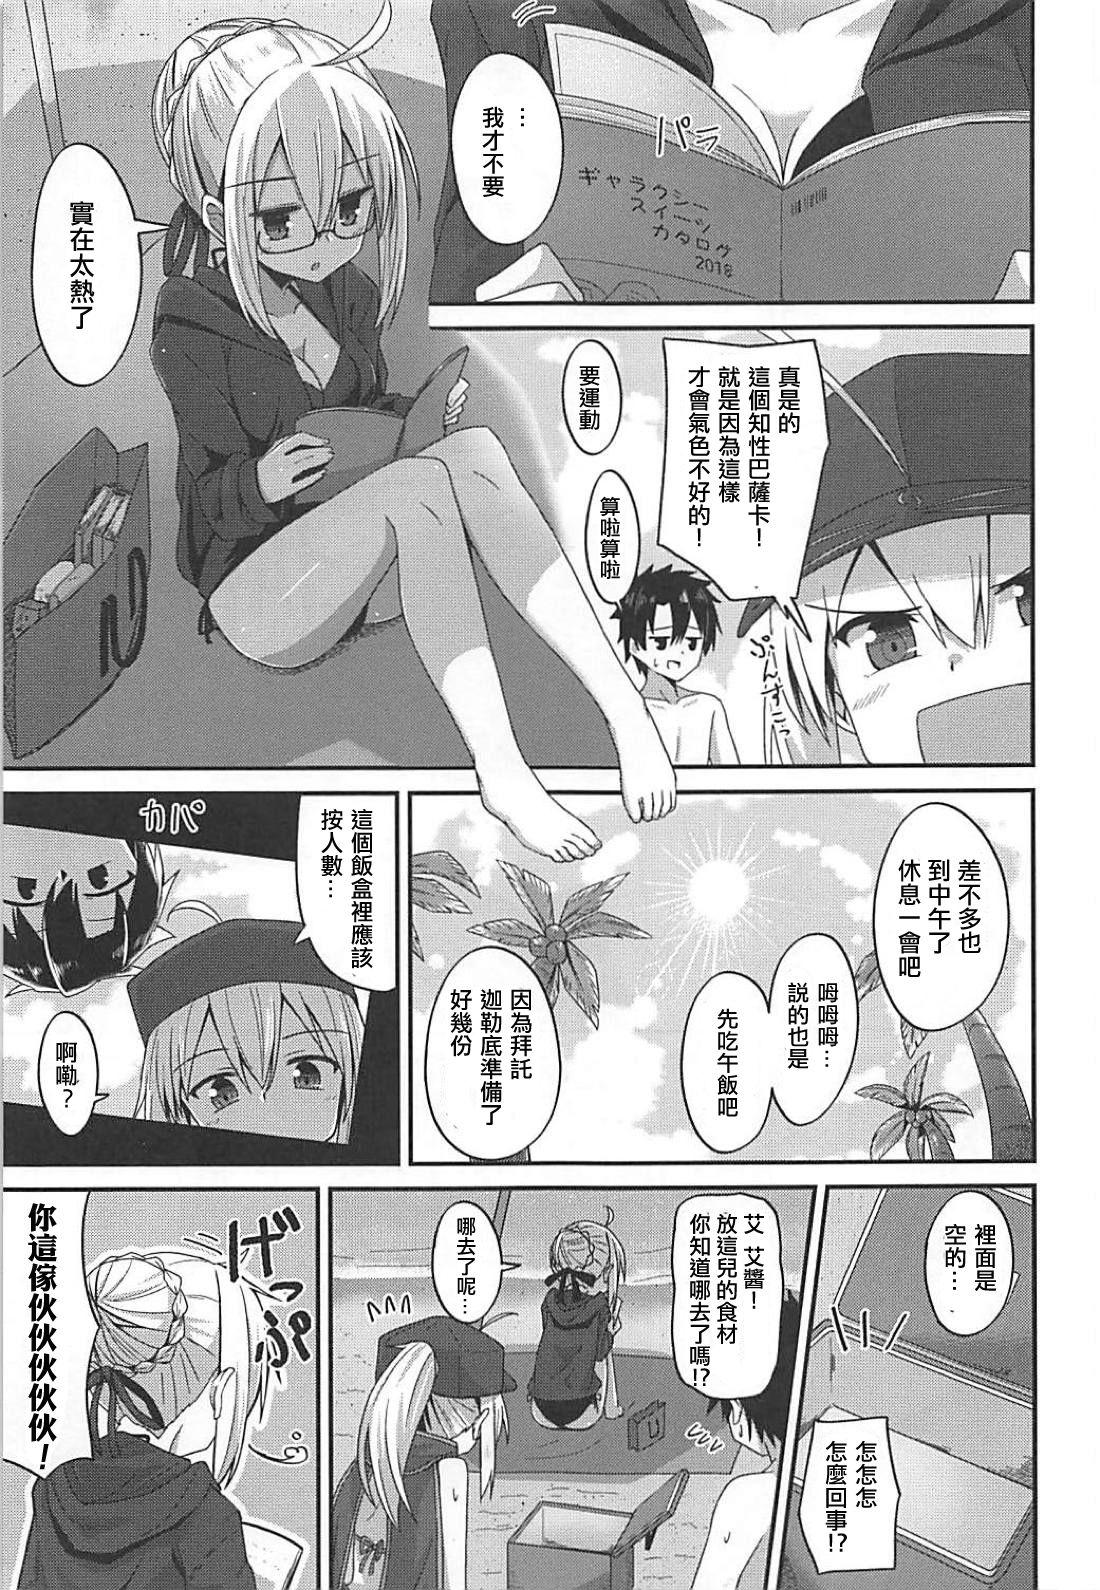 Milf Cougar Summer Heroines - Fate grand order Hot Blow Jobs - Page 6